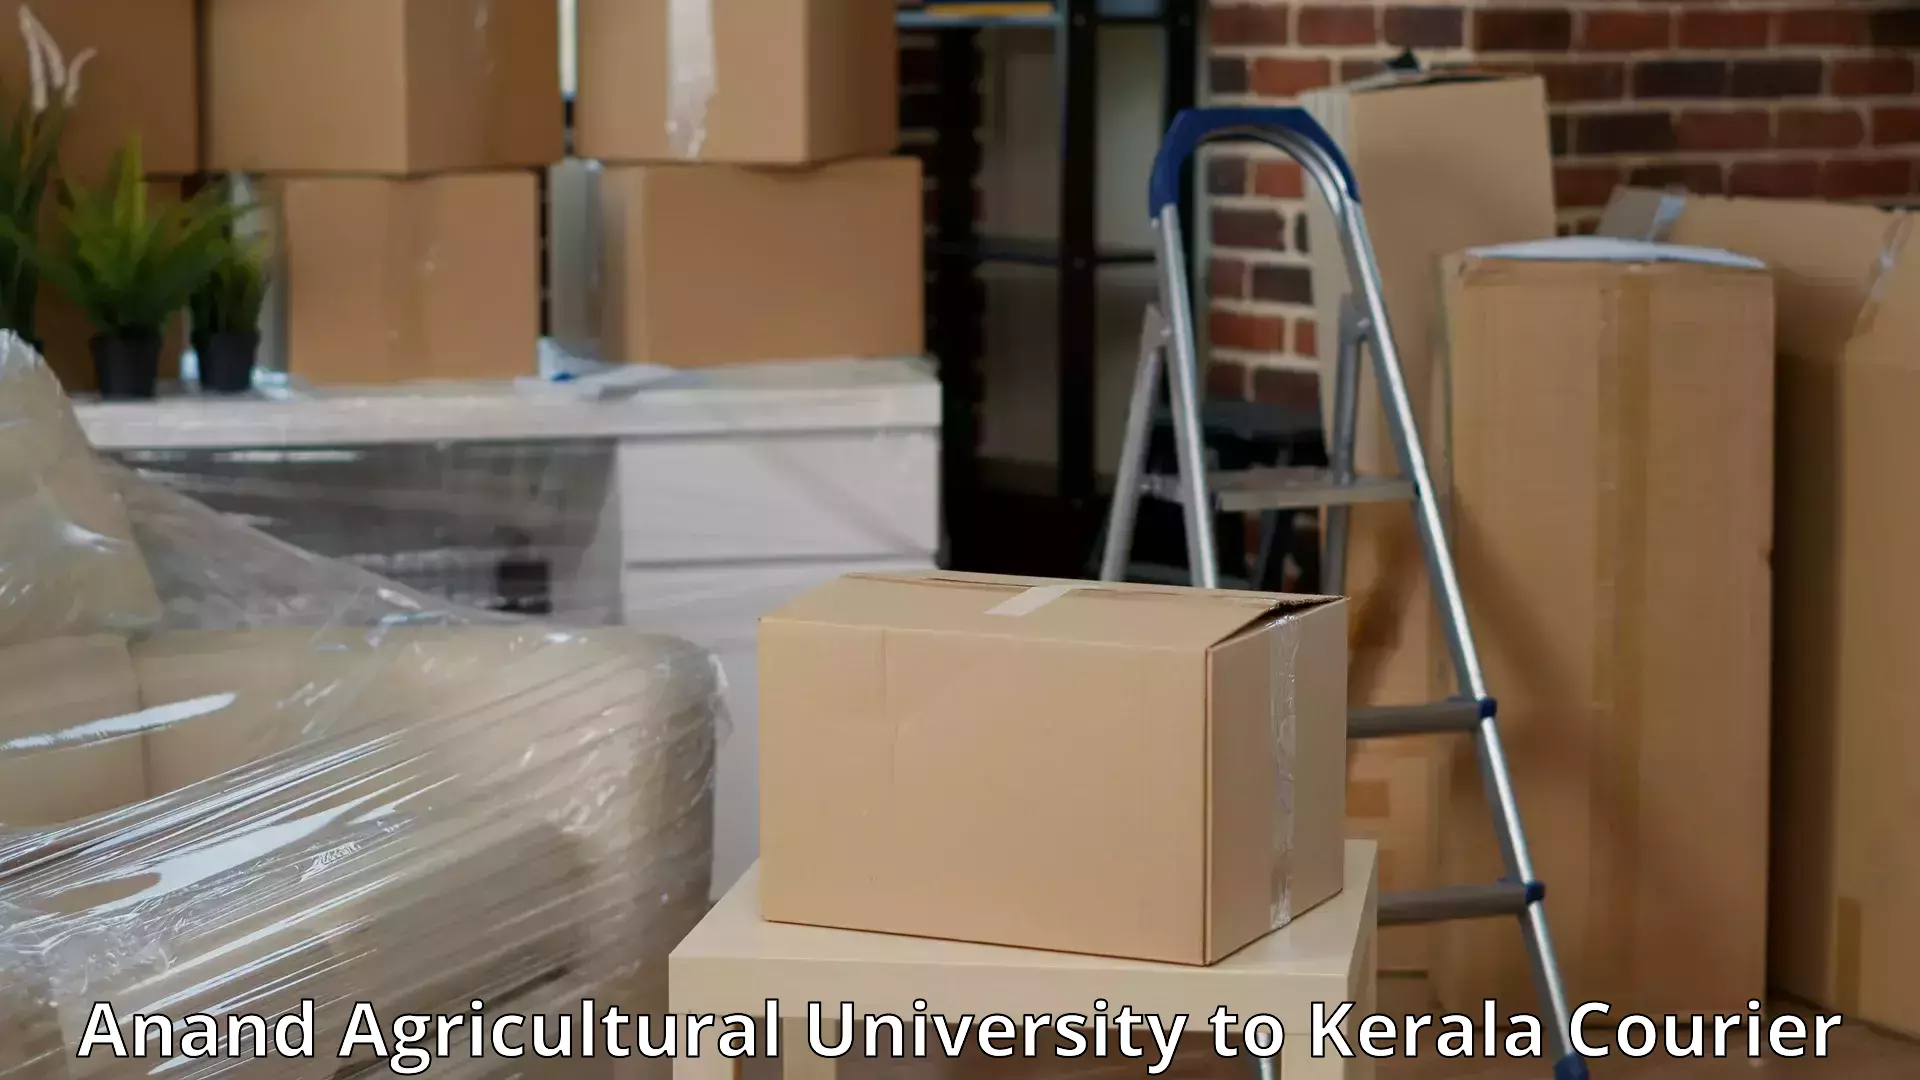 Efficient relocation services Anand Agricultural University to Cochin University of Science and Technology